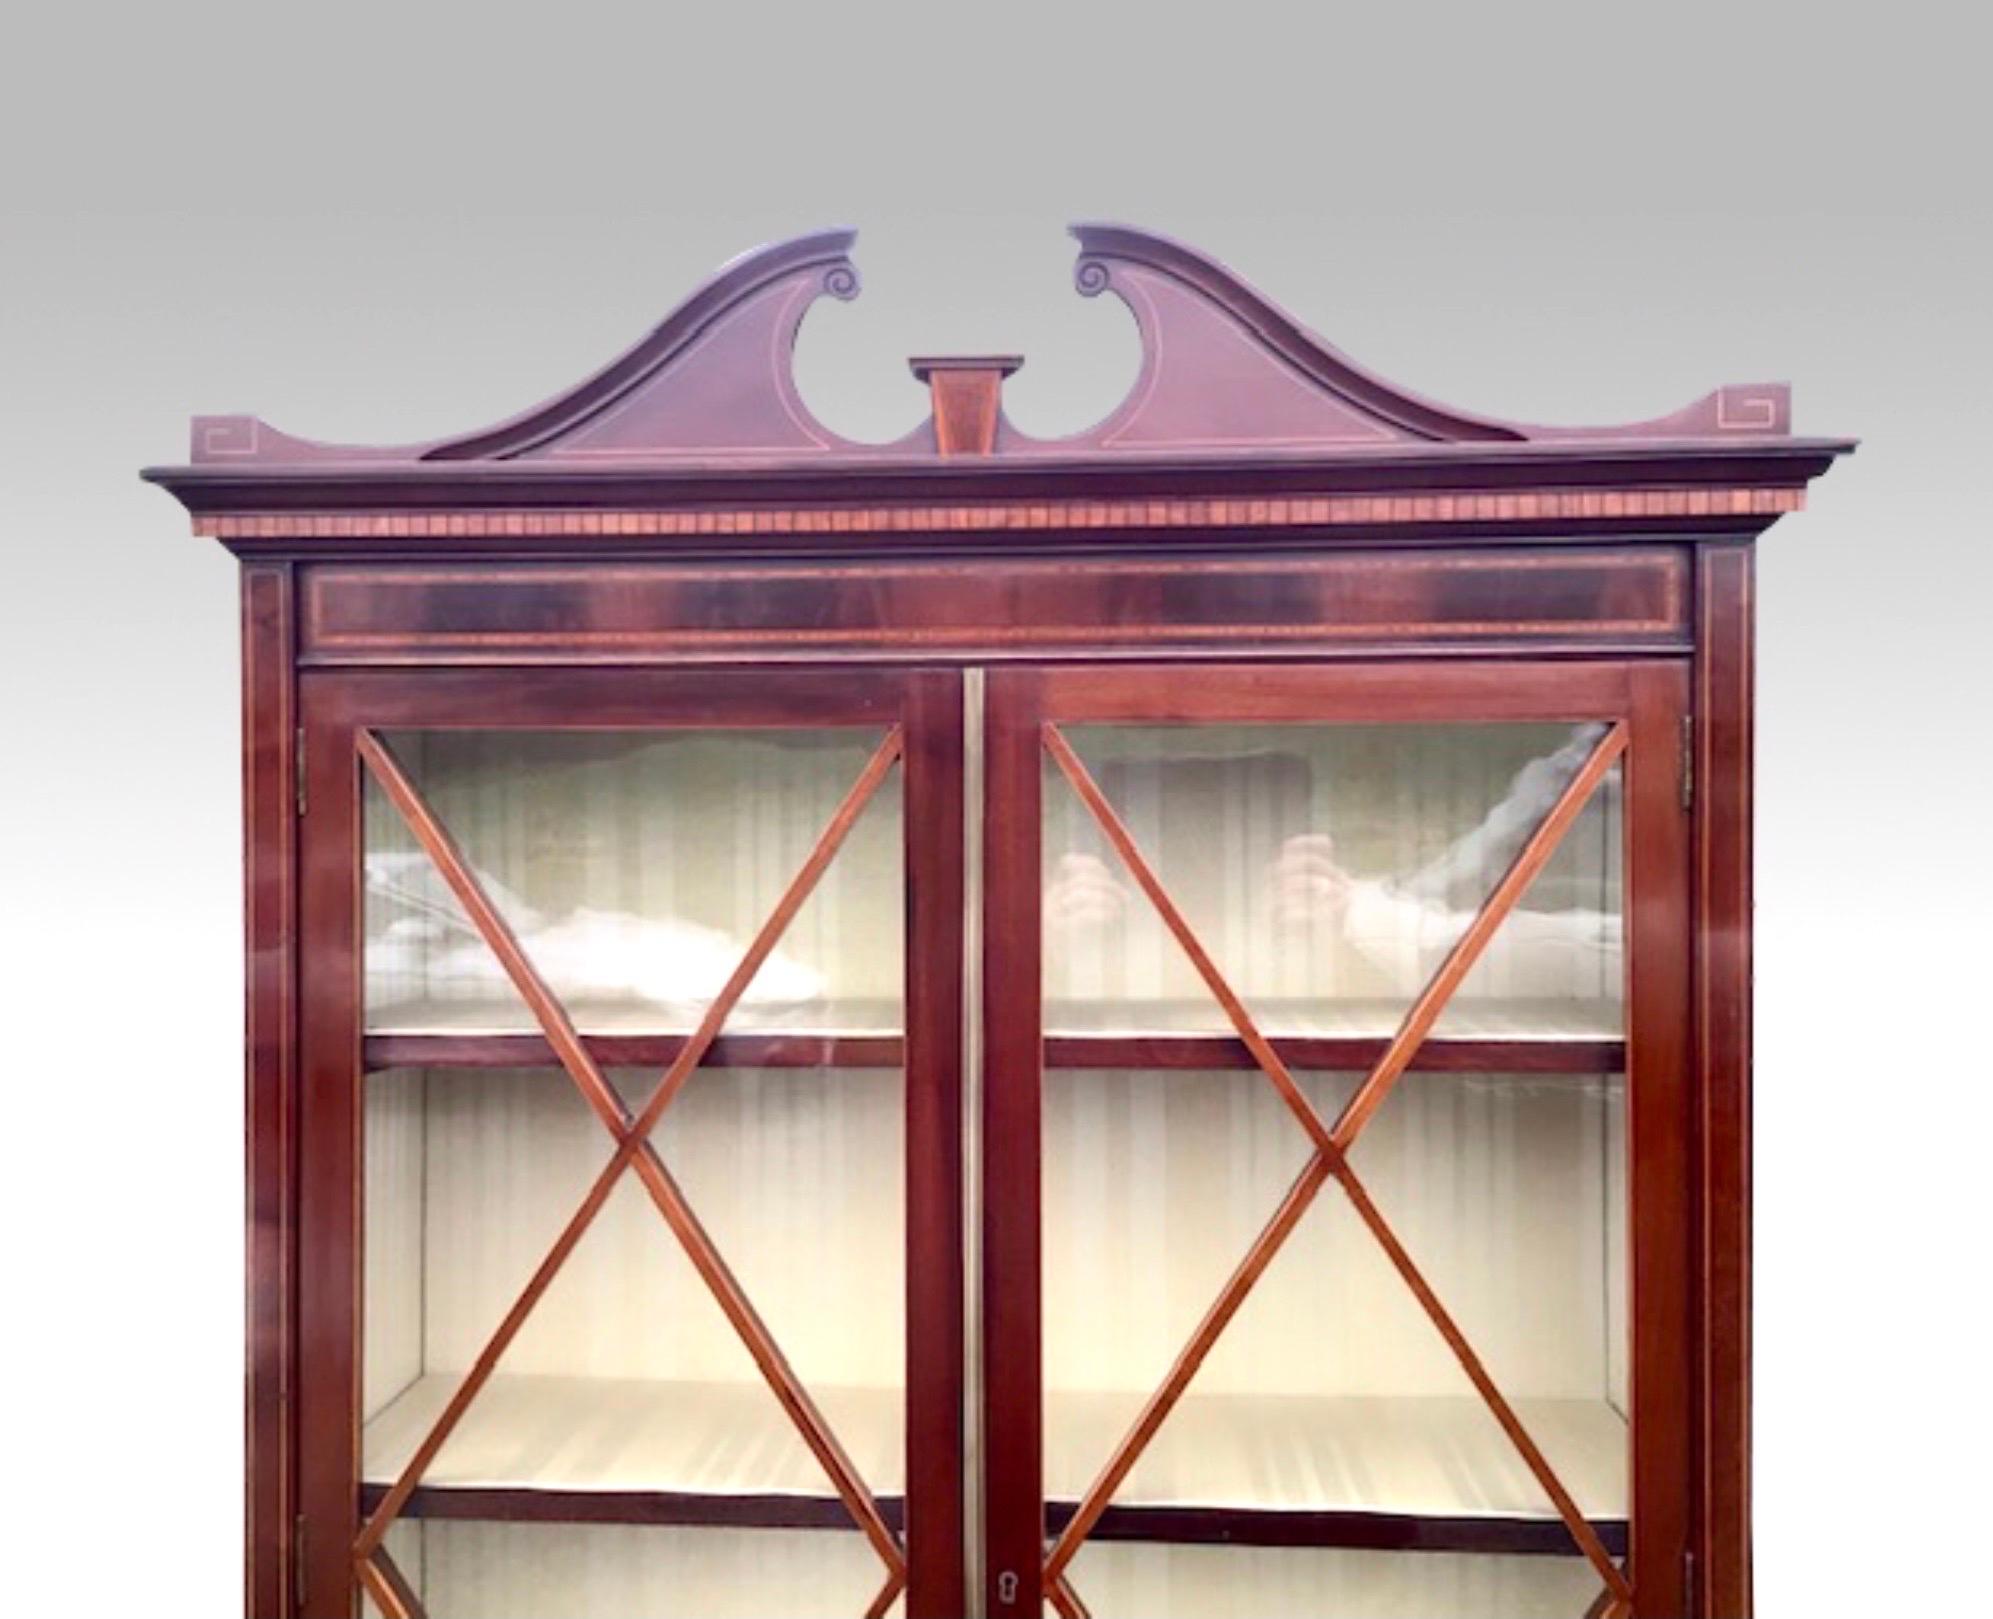 Super fine quality antique Edwardian inlaid mahogany narrow cabinet, bookcase
Superb Oval Panelled Doors
Beautifully upholstered interior.
Good storage under display.
c1895 
Measures: 89 ins x 37 ins x 17 ins.
 